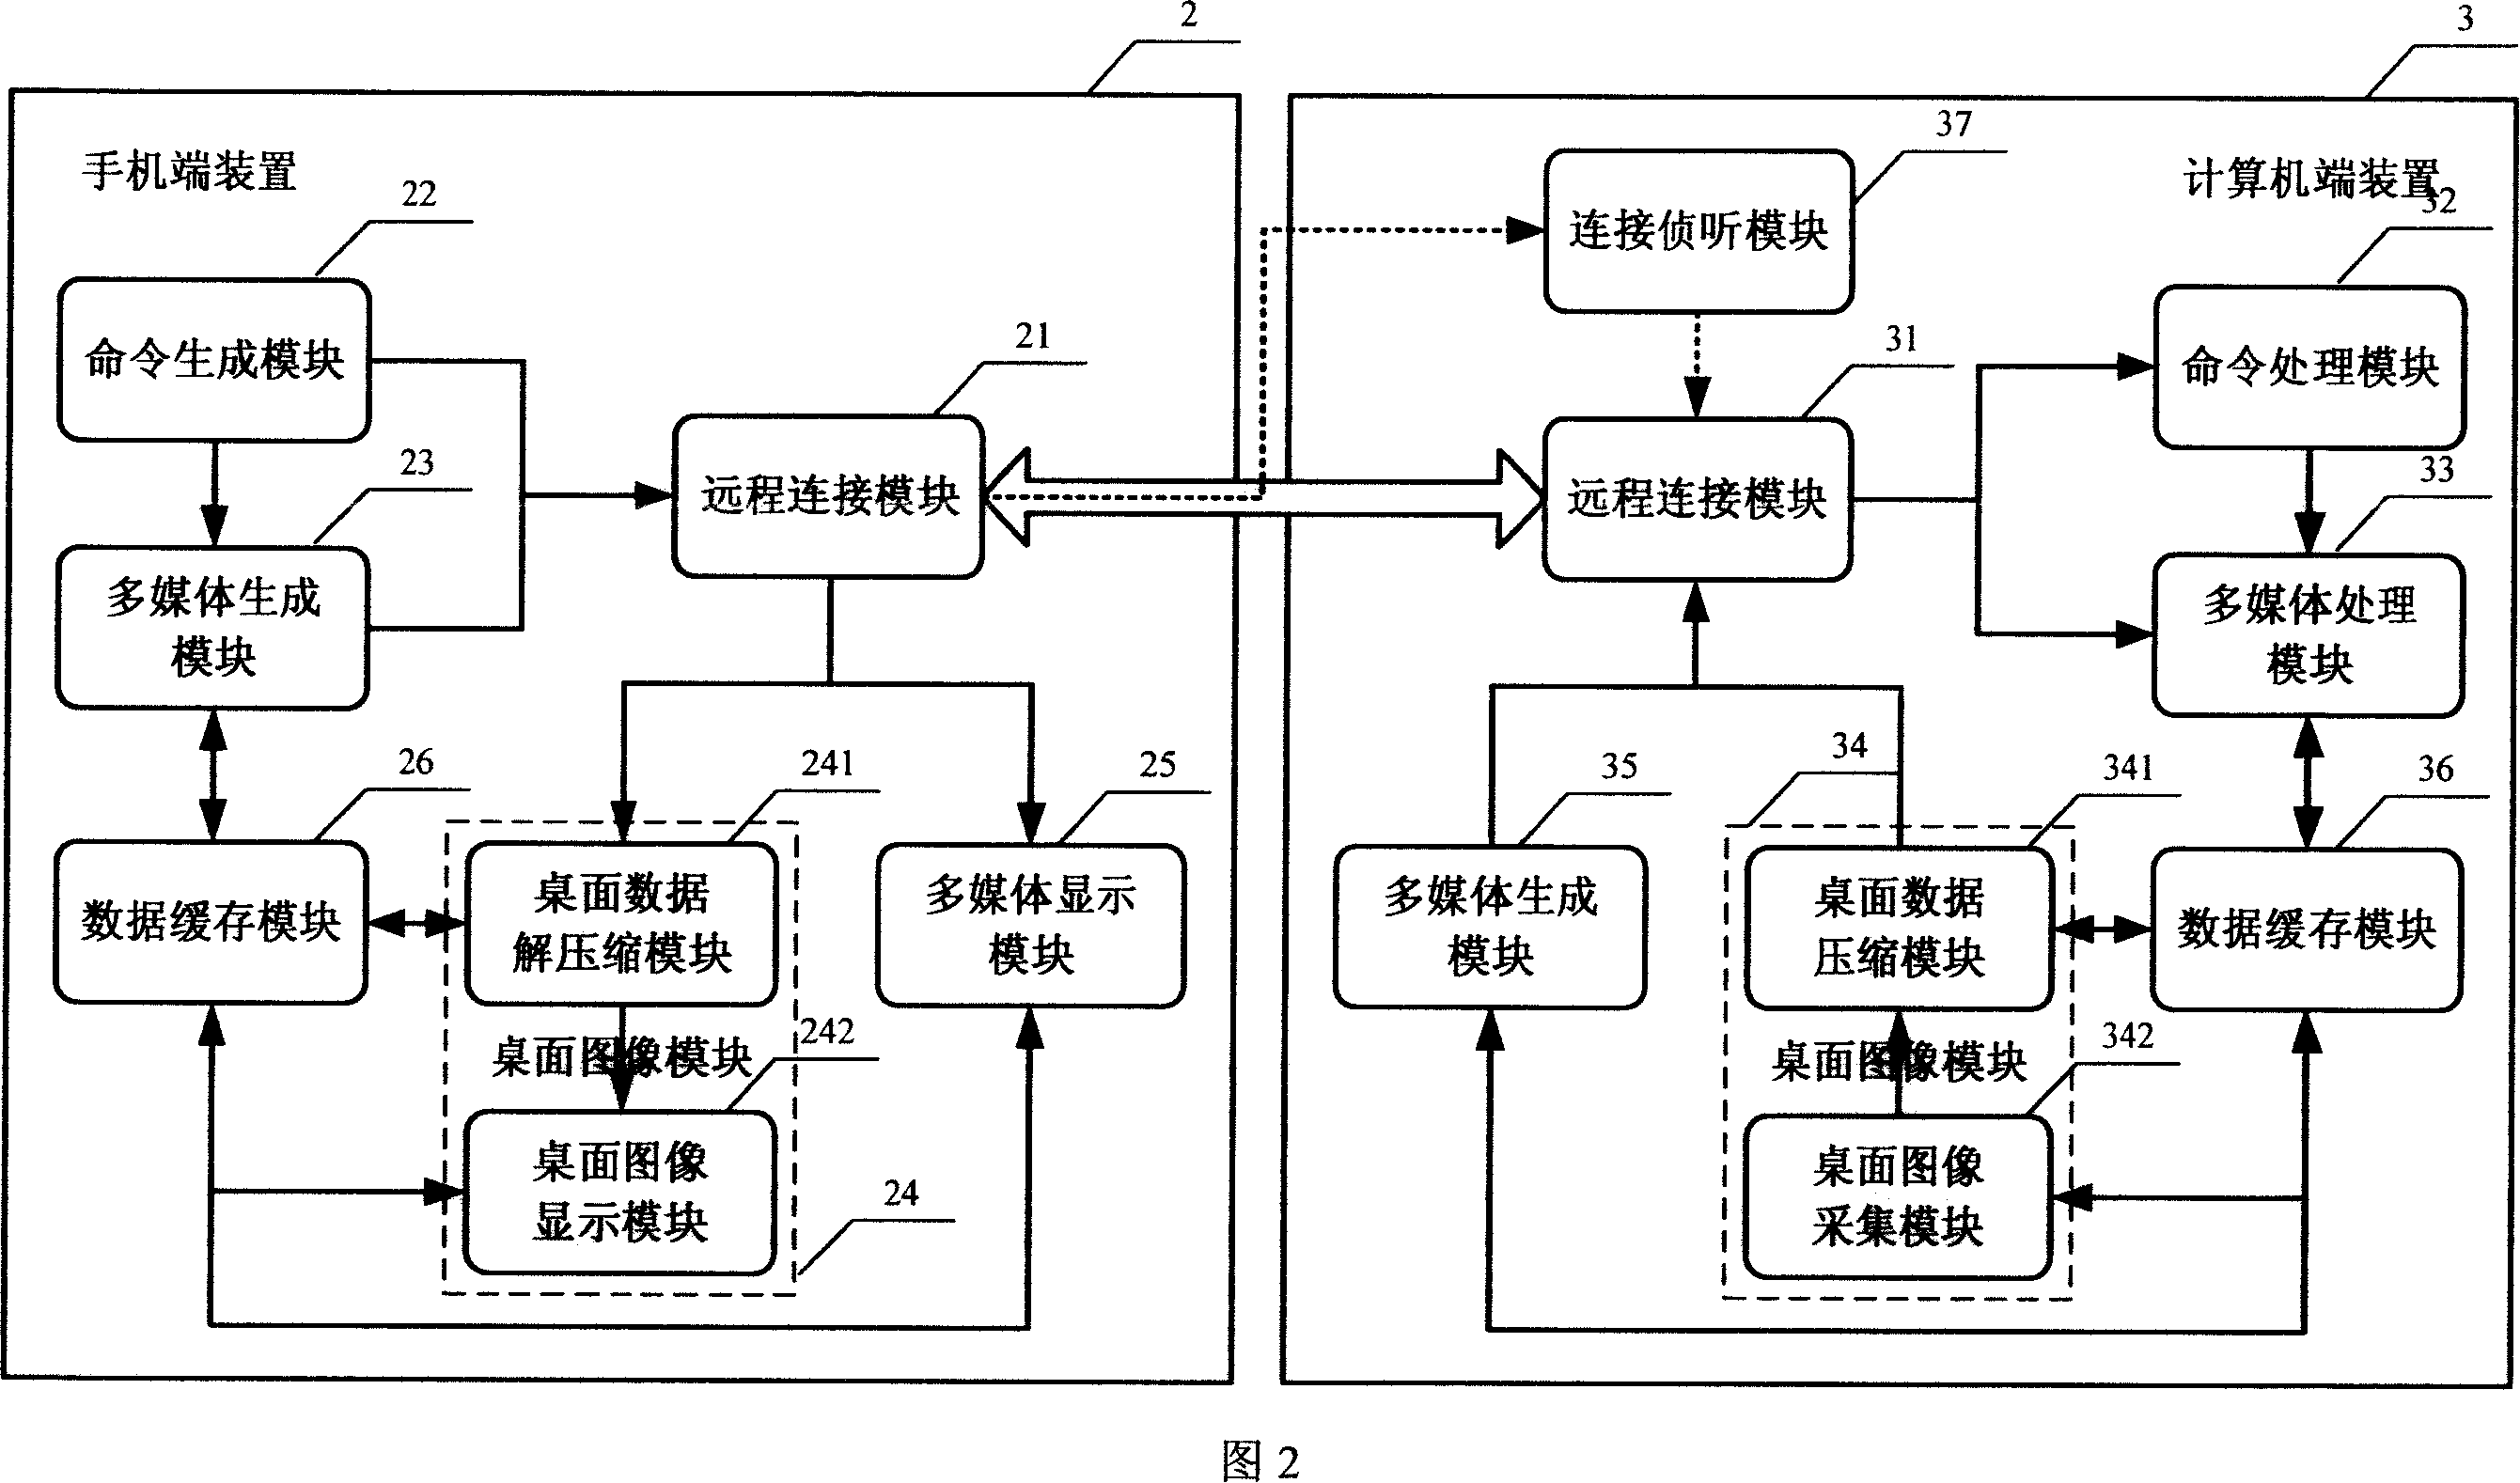 Method and system for displaying and operating remote computer on mobile phone